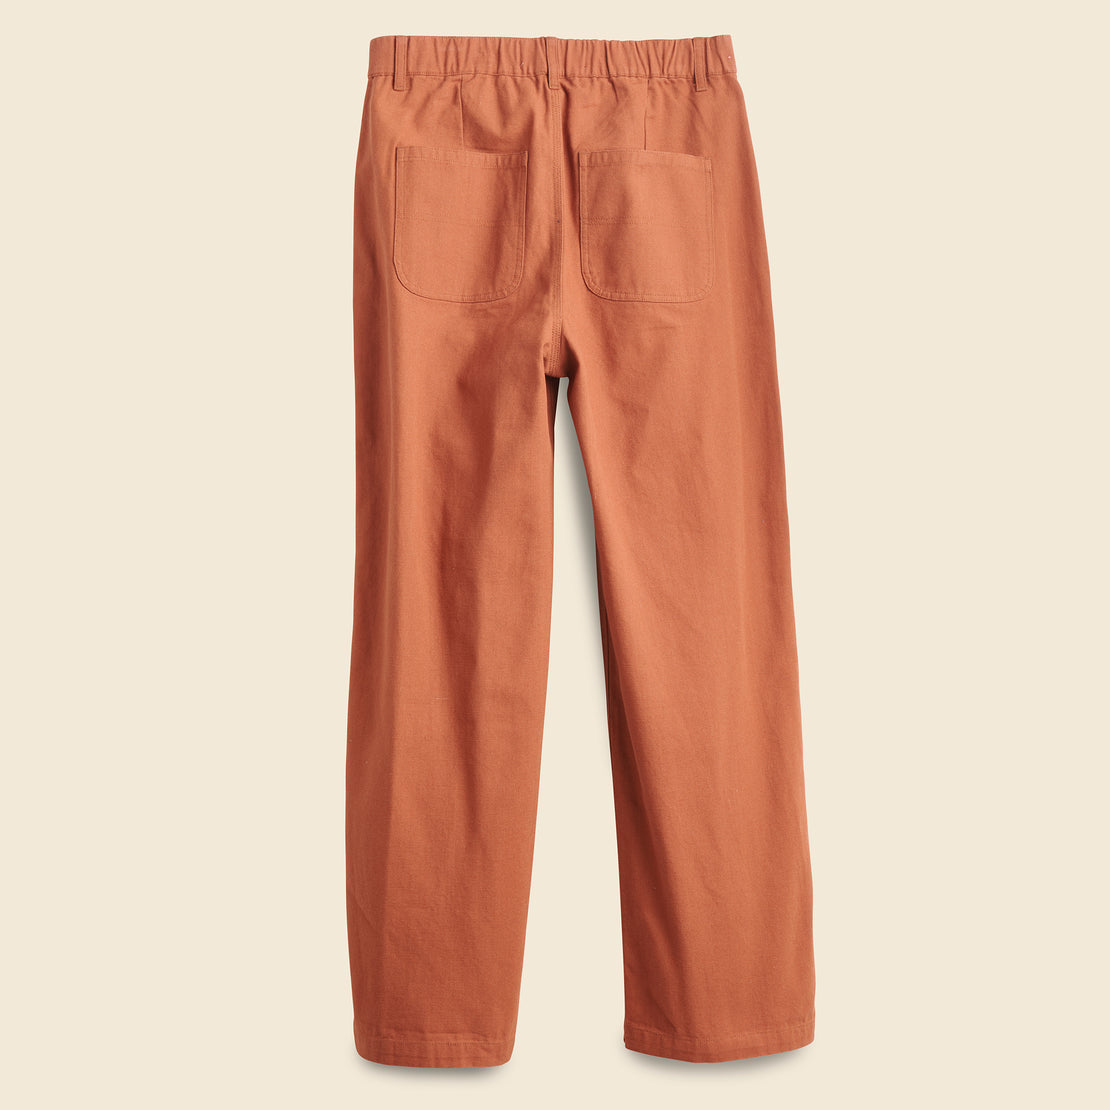 Painter Pants - Cognac - Mollusk - STAG Provisions - W - Pants - Twill